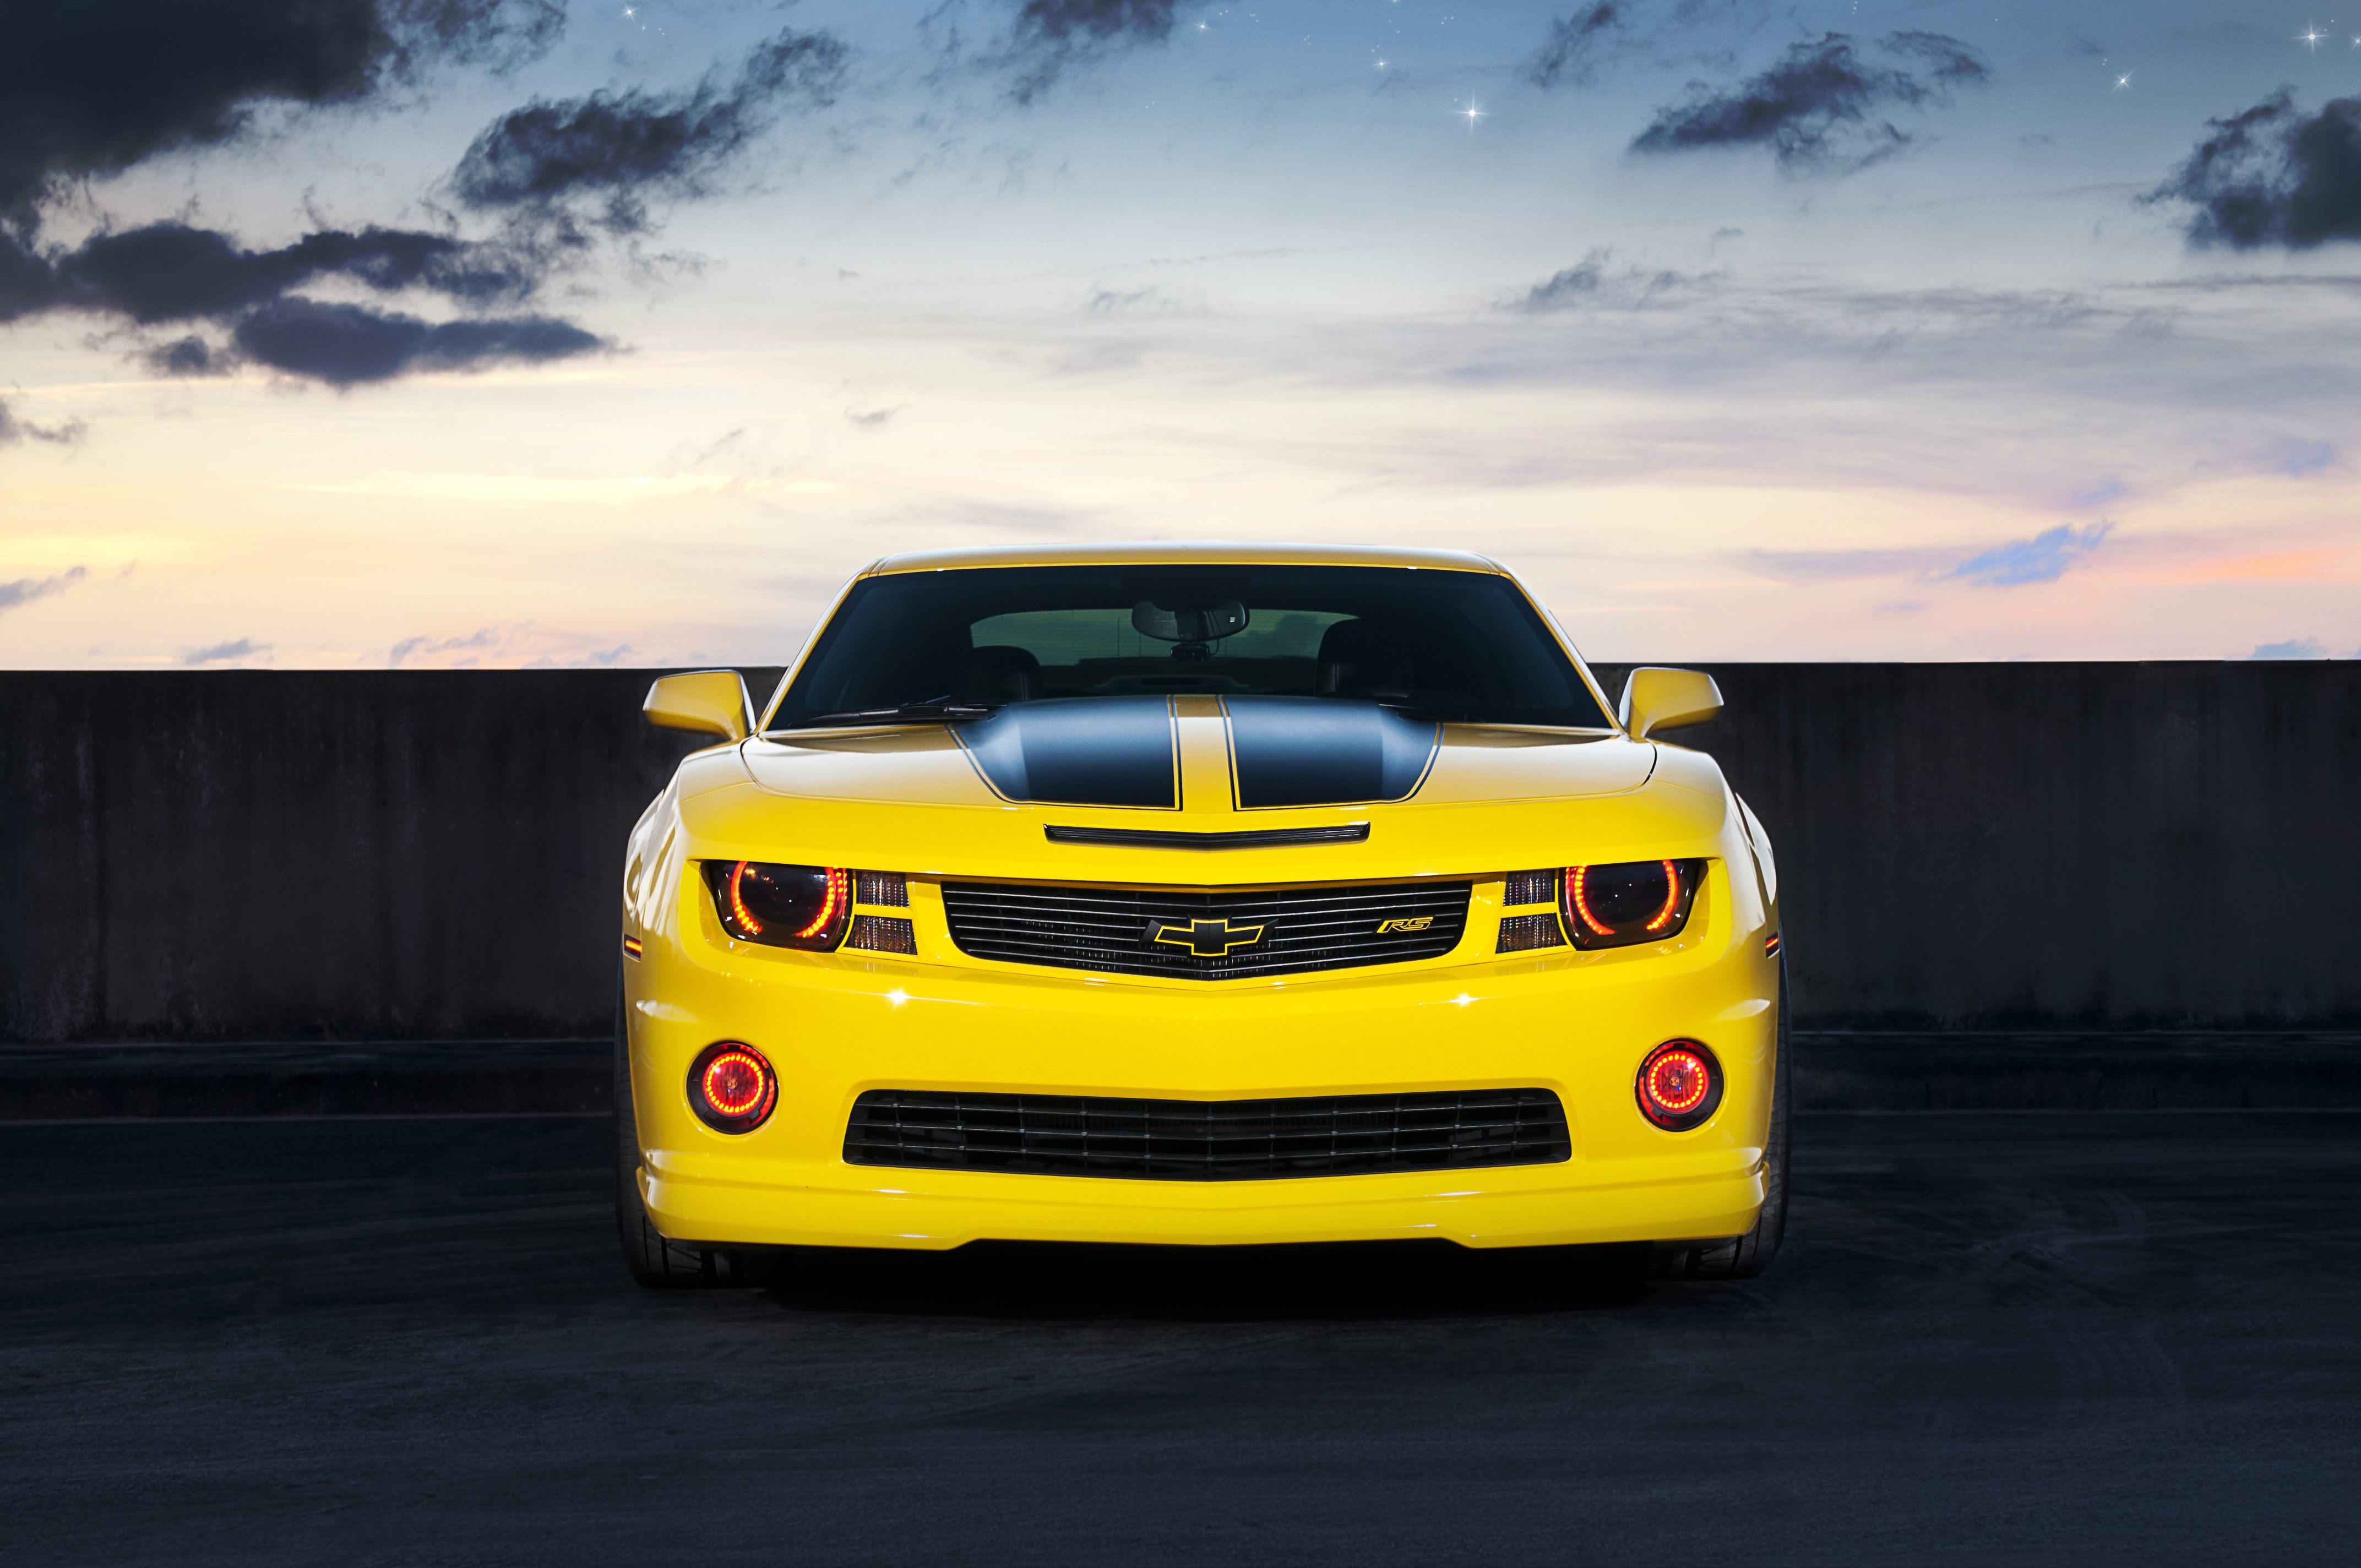 Wallpapers Chevrolet Camaro muscles cars on the desktop